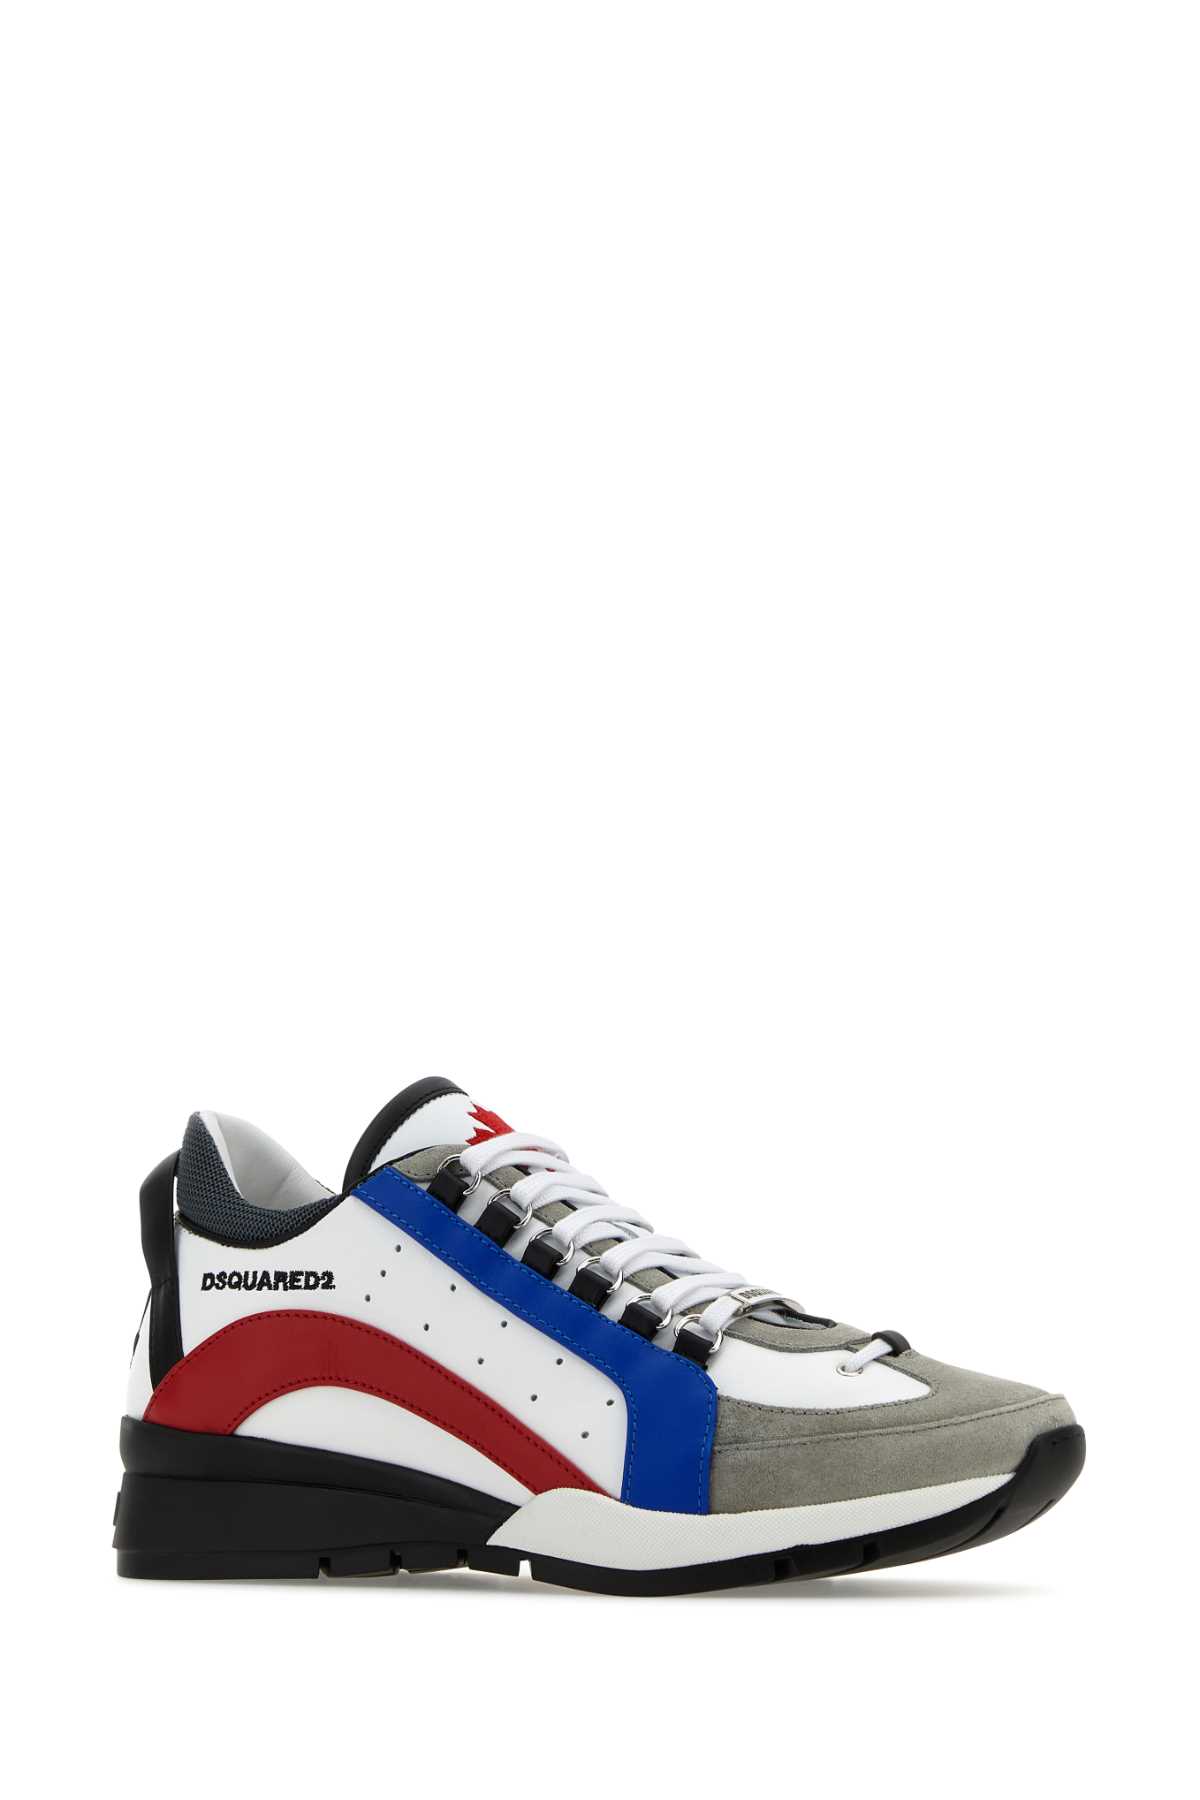 DSQUARED2 MULTICOLOR SUEDE AND LEATHER LEGENDARY SNEAKERS